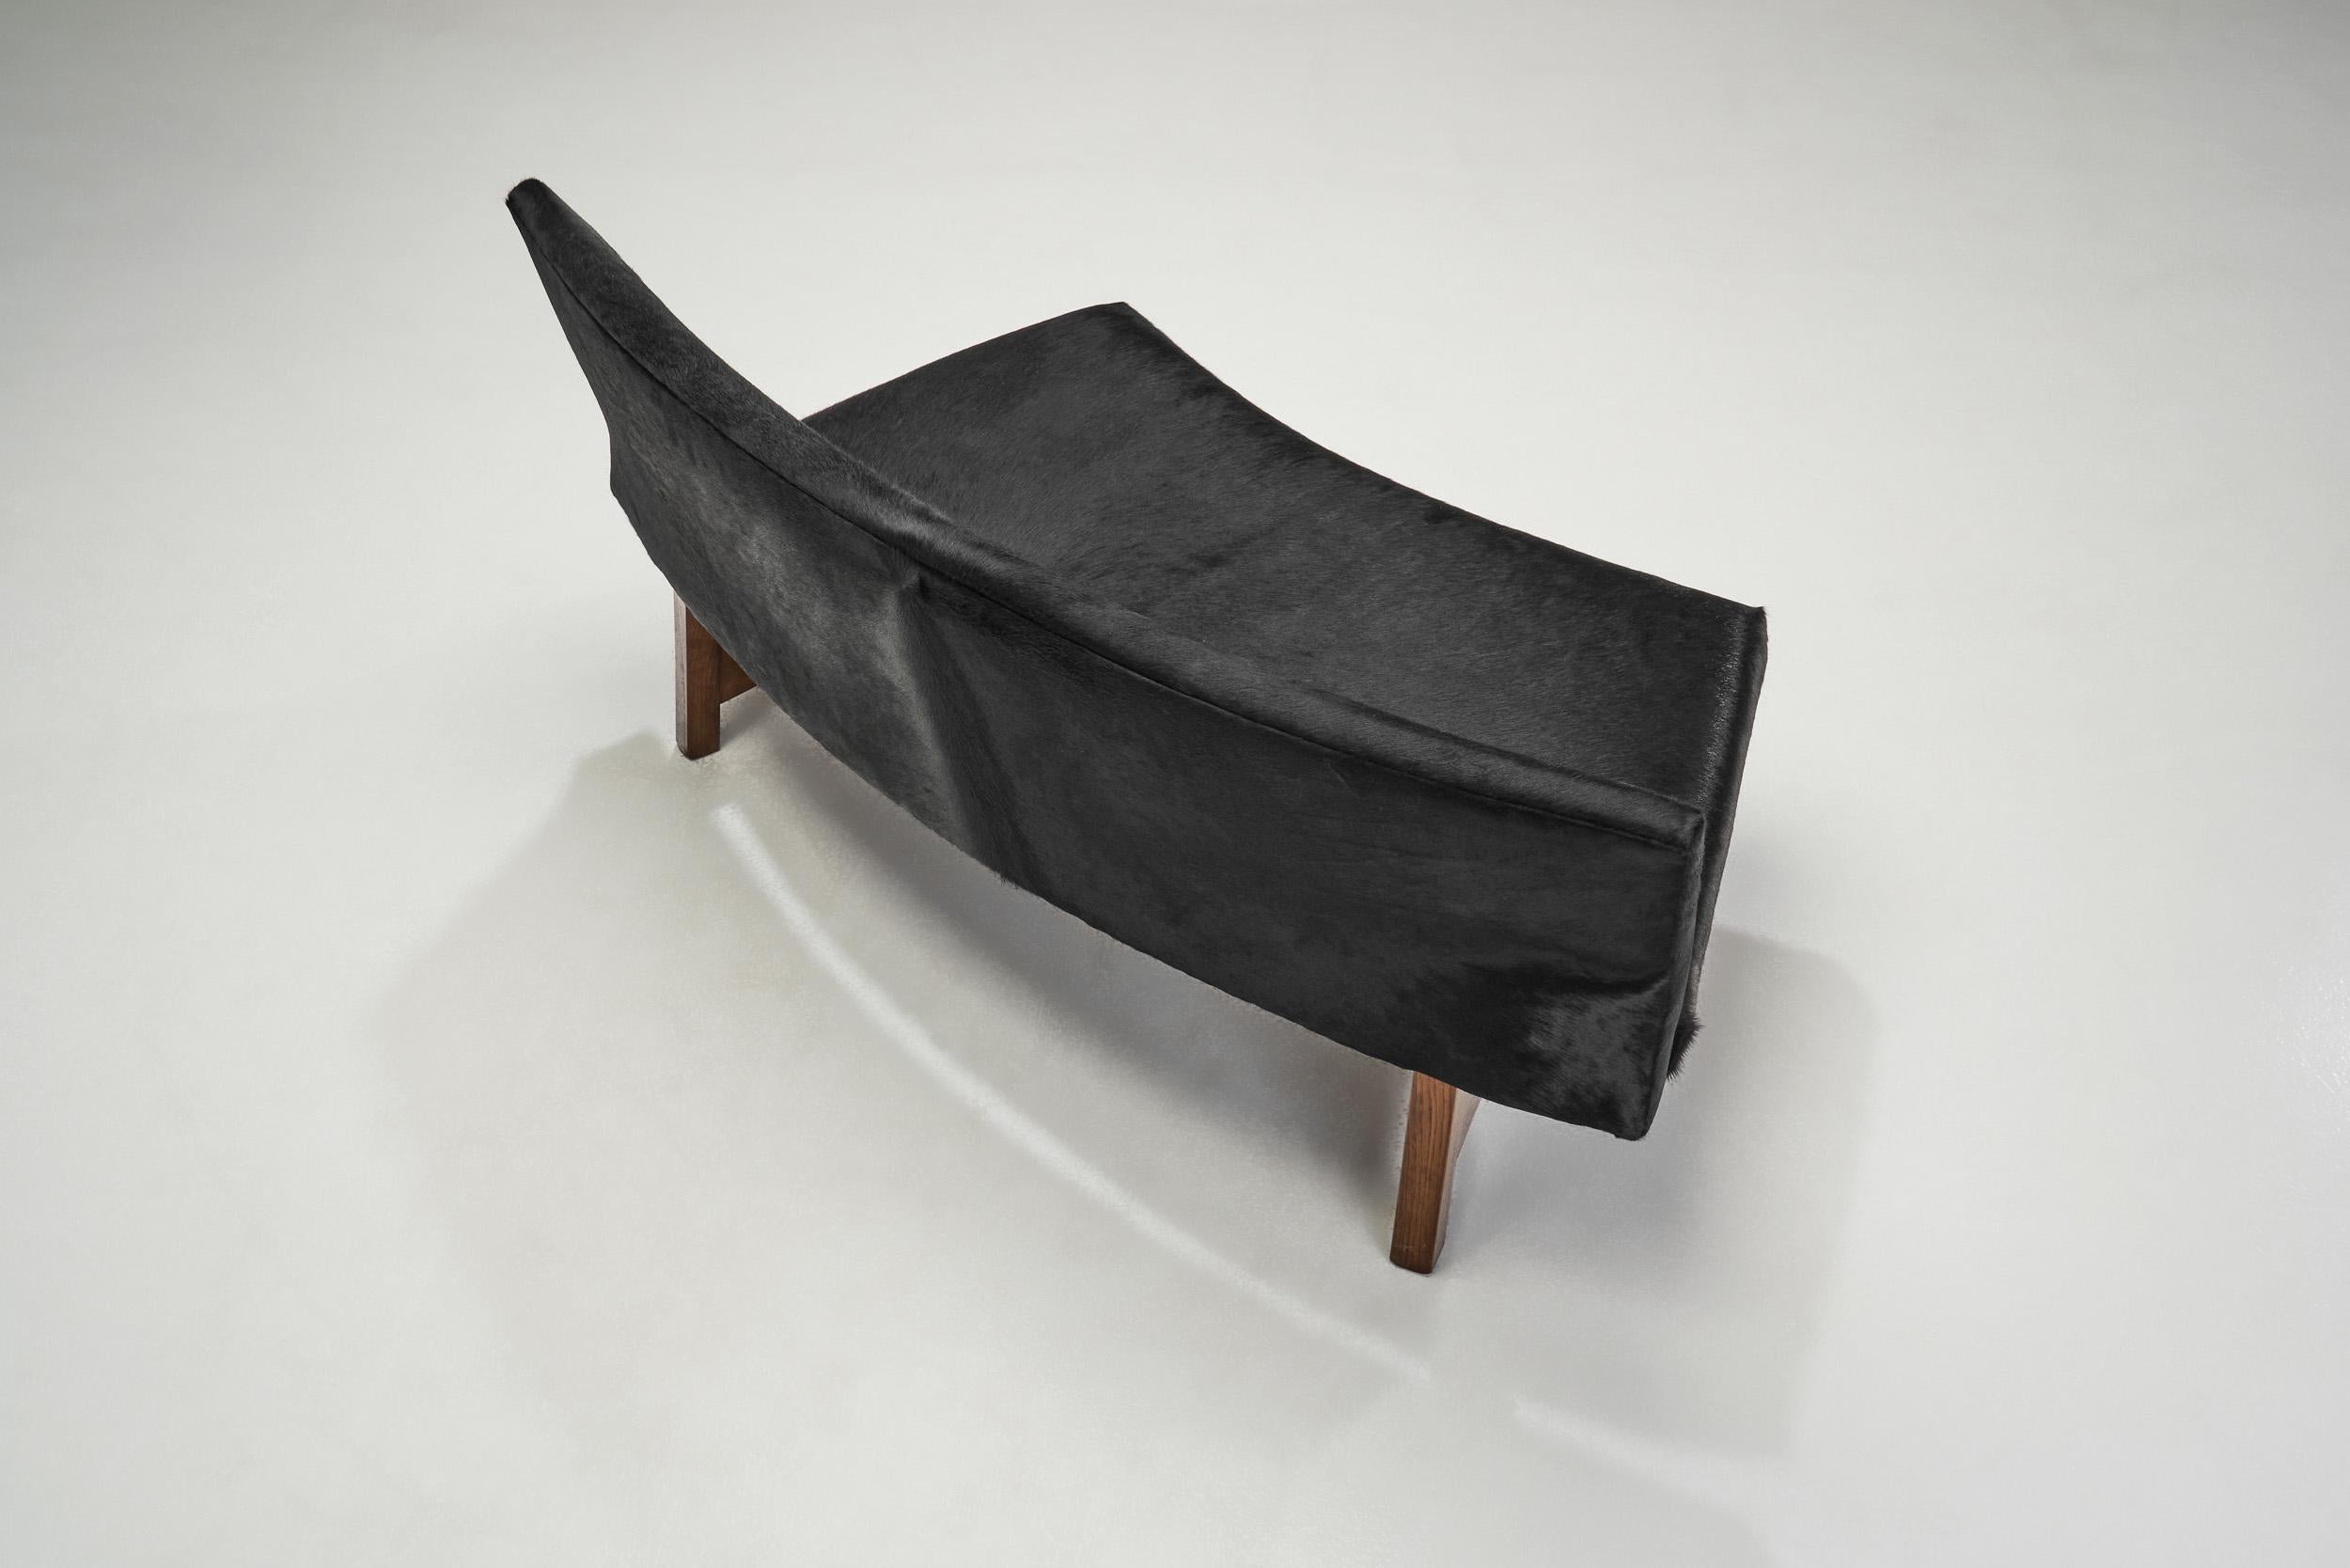 European Mid-Century Two Part Sofa in Black Cow Hide, Europe Ca 1950s For Sale 3